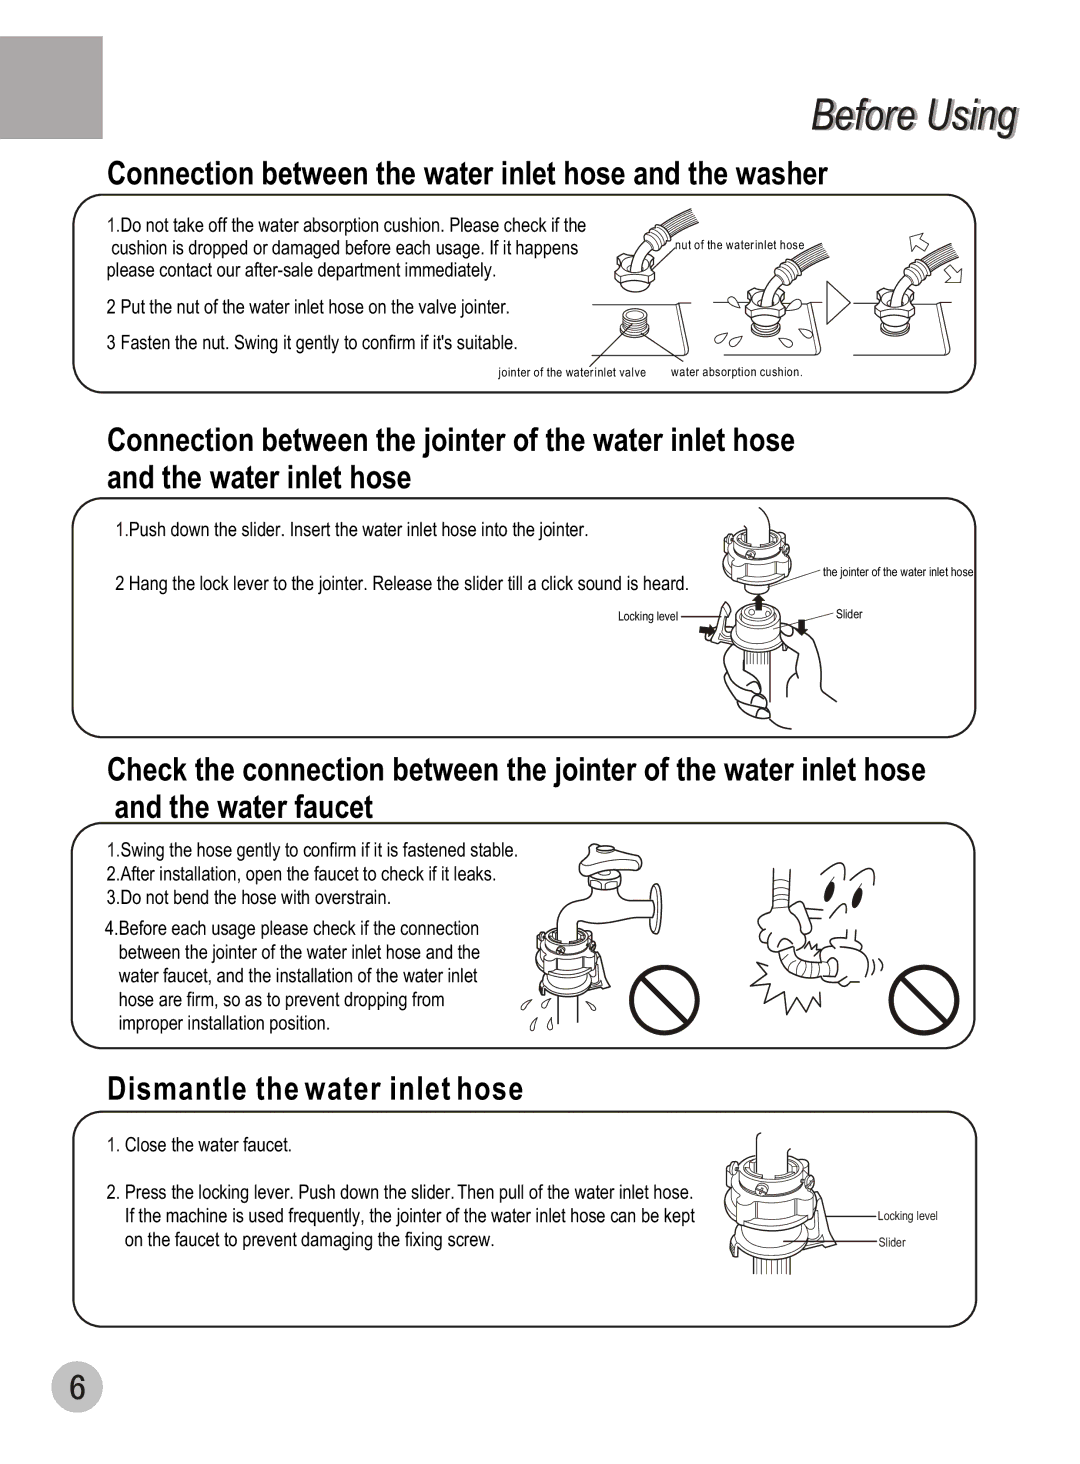 Haier DWE-3120A user manual Connection between the water inlet hose and the washer, Dismantle the water inlet hose 